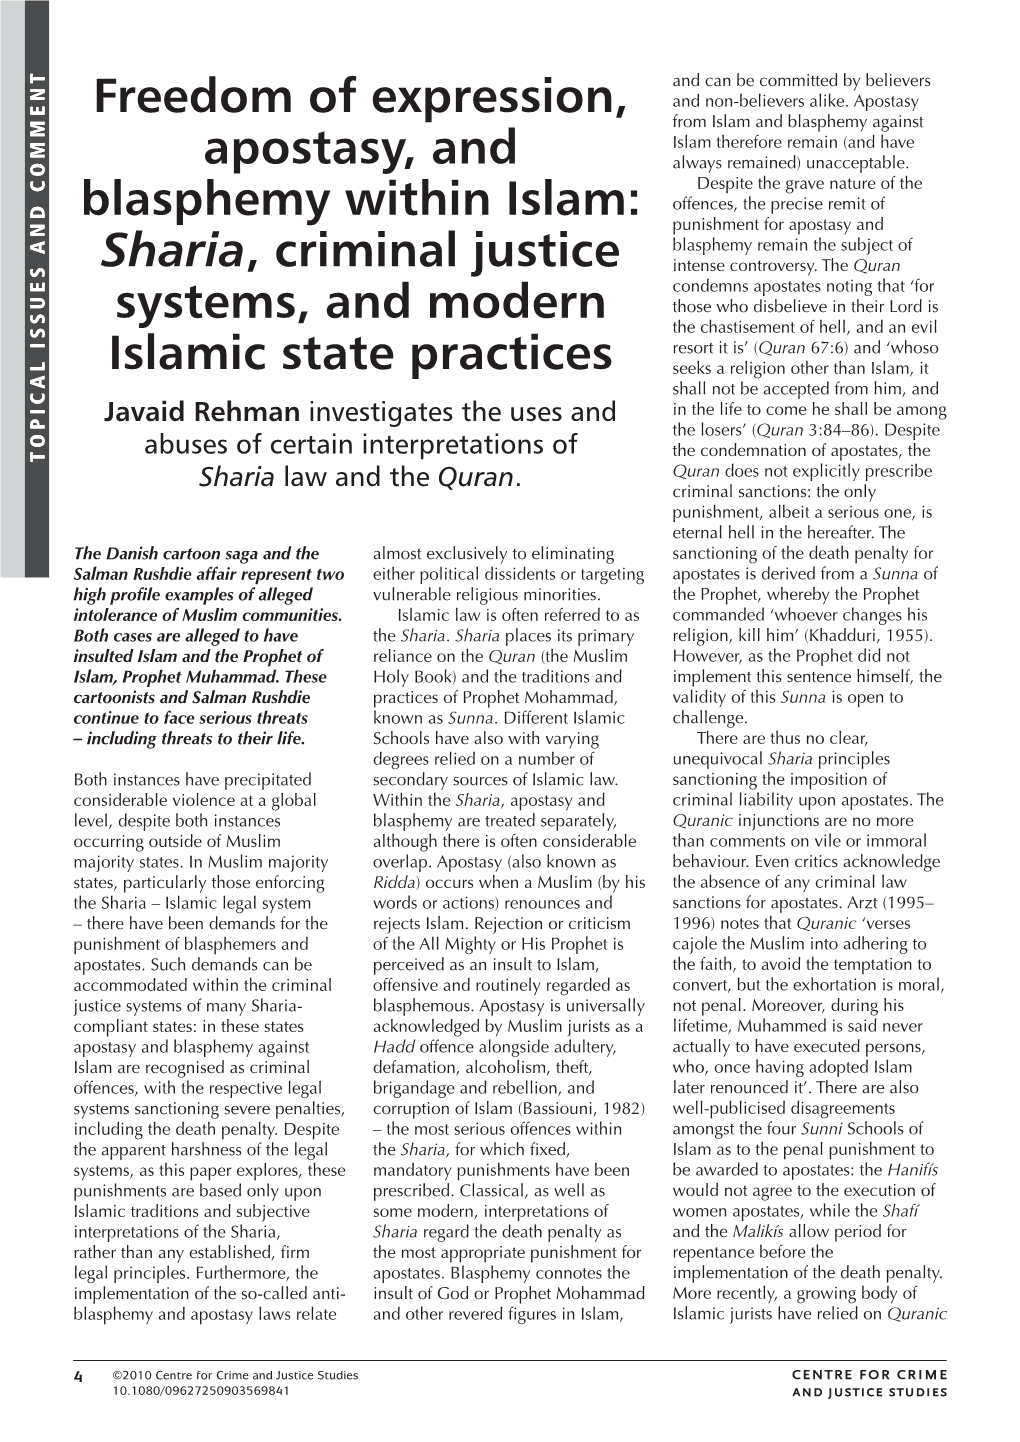 Freedom of Expression, Apostasy, and Blasphemy Within Islam: Sharia